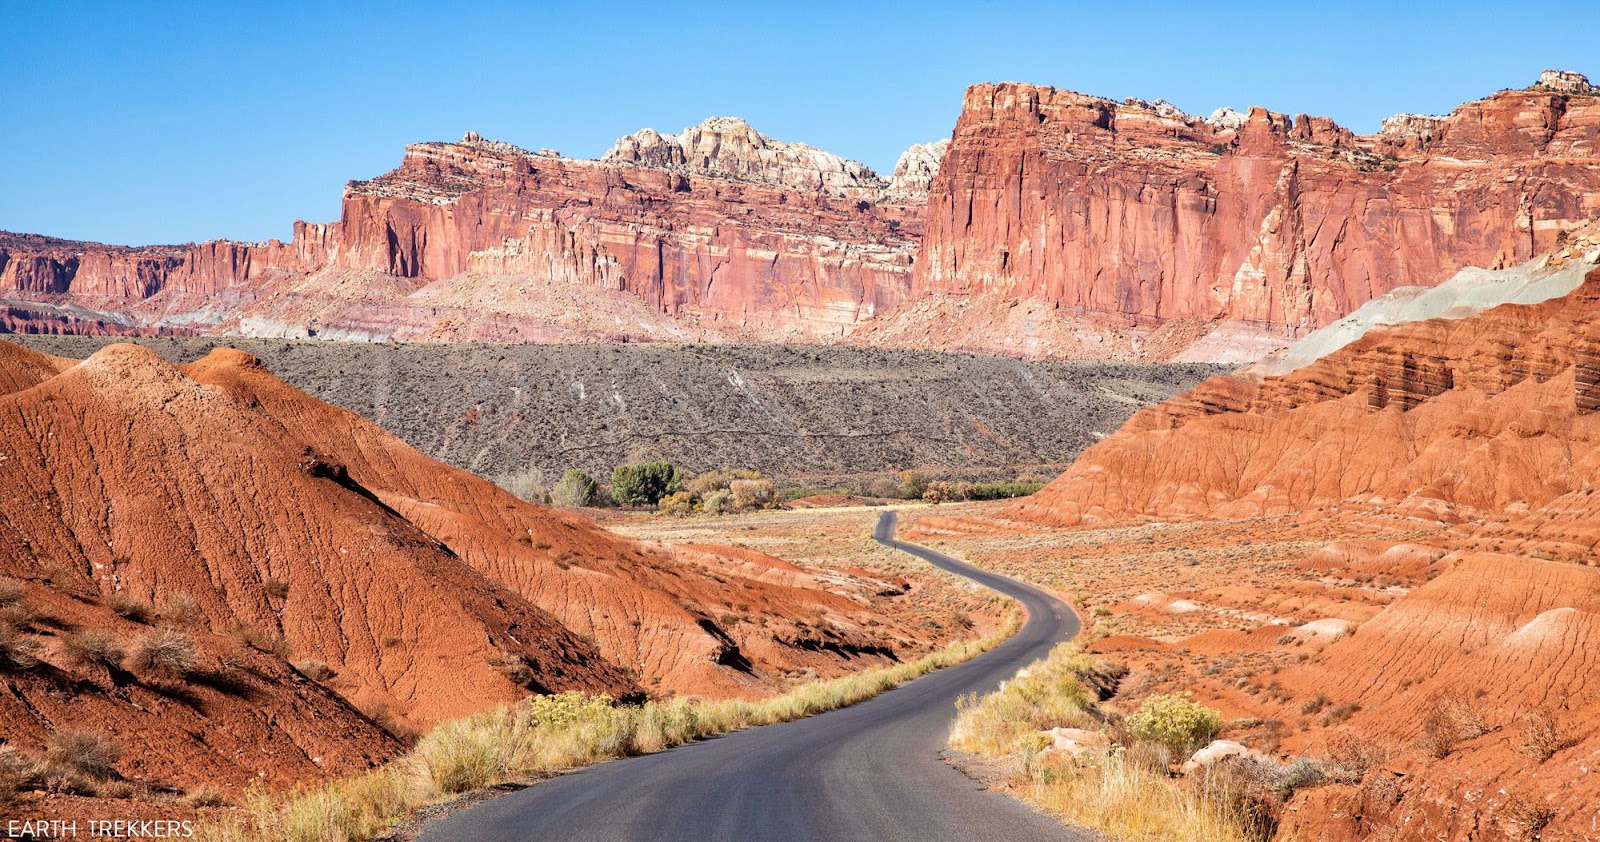 Where To Stay Near Capitol Reef National Park
